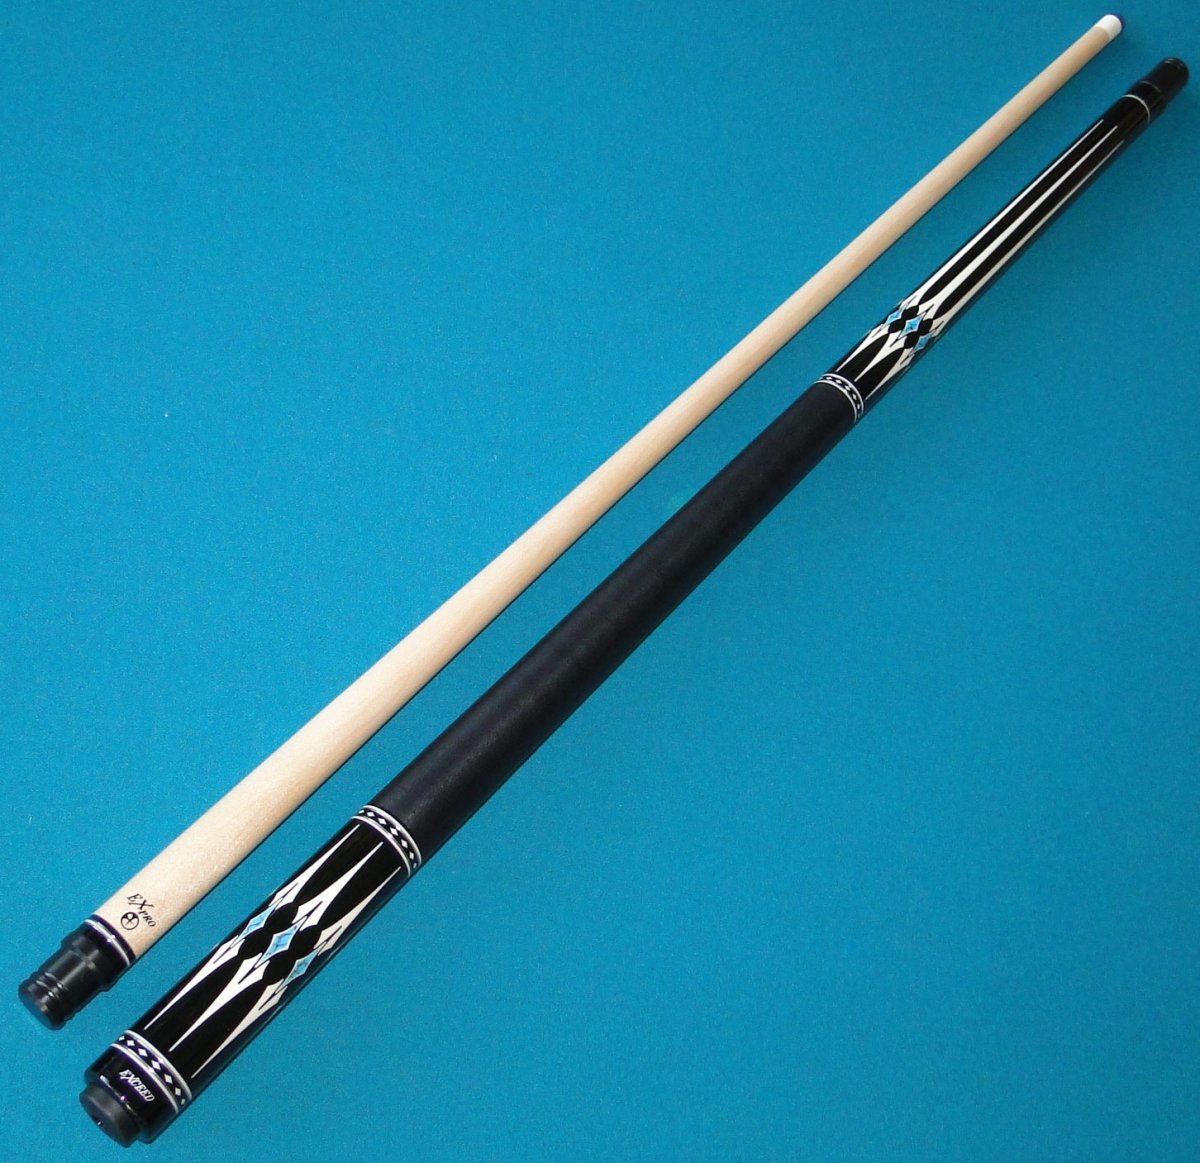 Fancy Exceed Cue with Turquoise Inlays | AzBilliards Forums